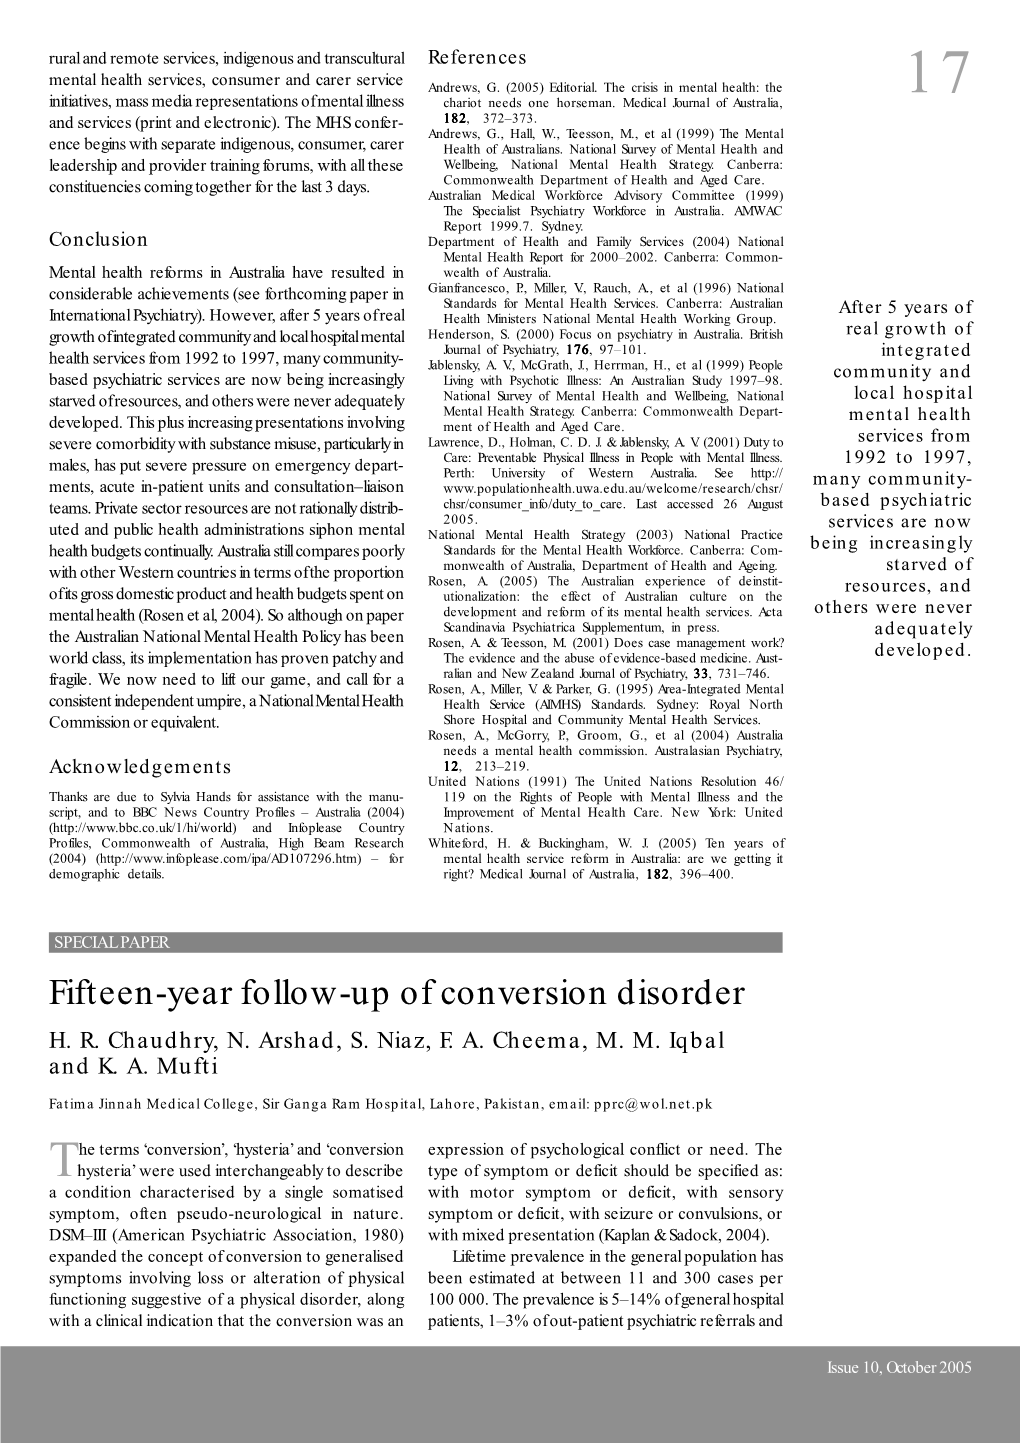 Fifteen-Year Follow-Up of Conversion Disorder H